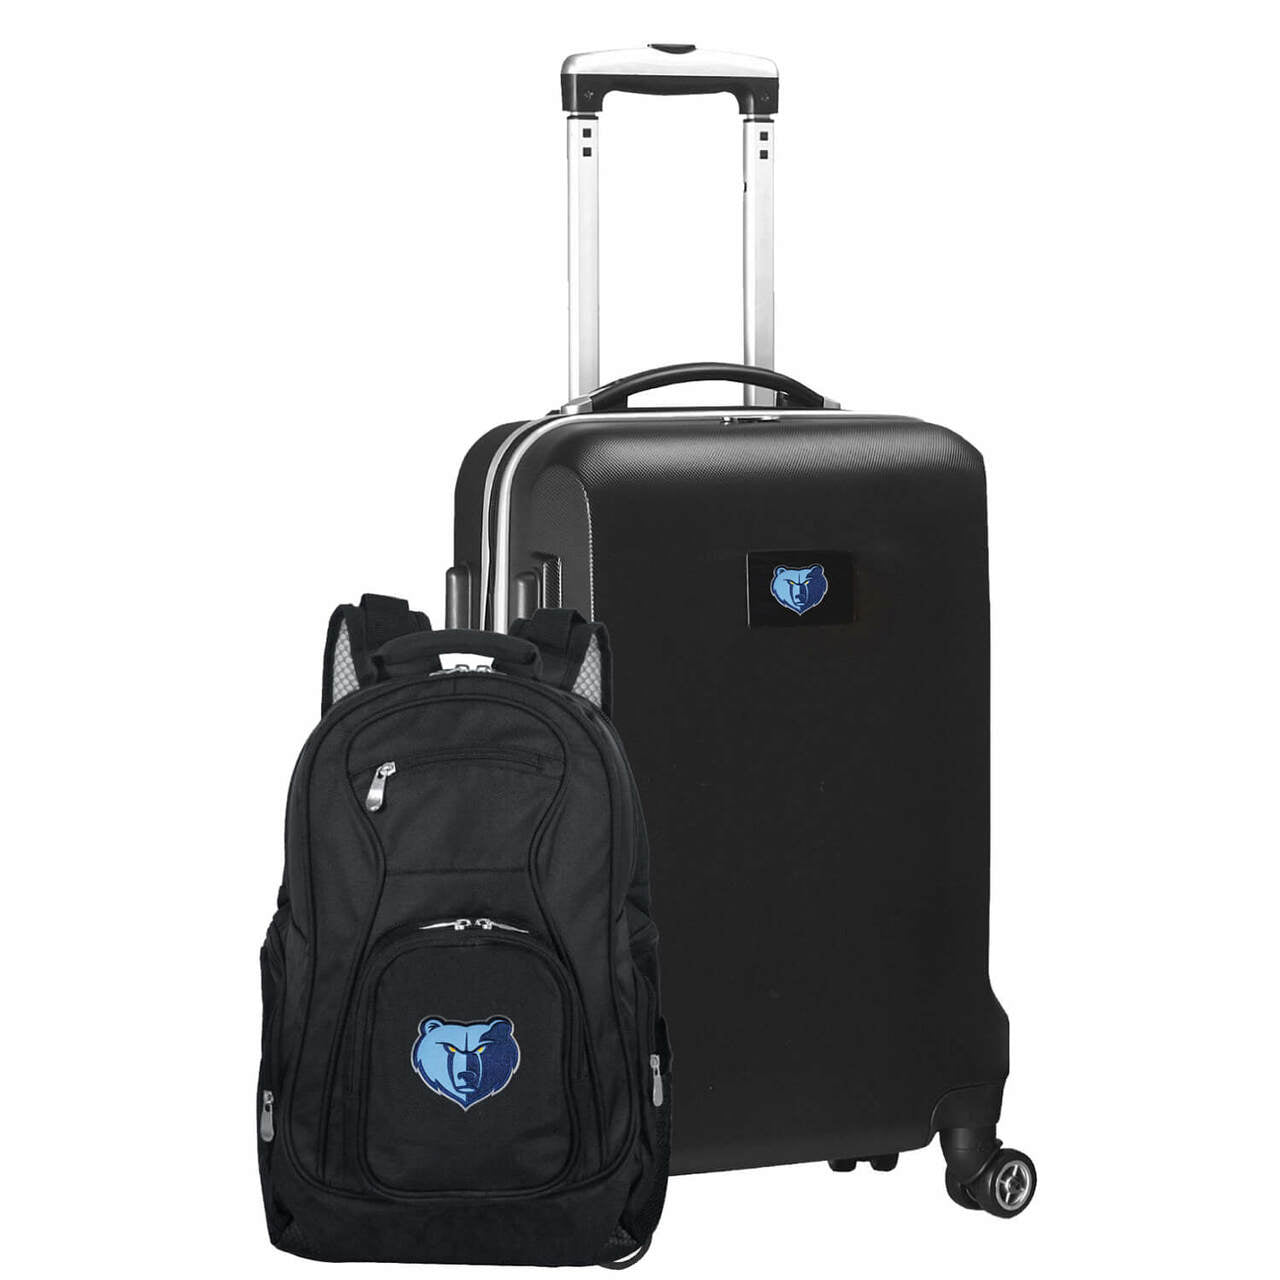 Memphis Grizzlies Deluxe 2-Piece Backpack and Carry on Set in Black